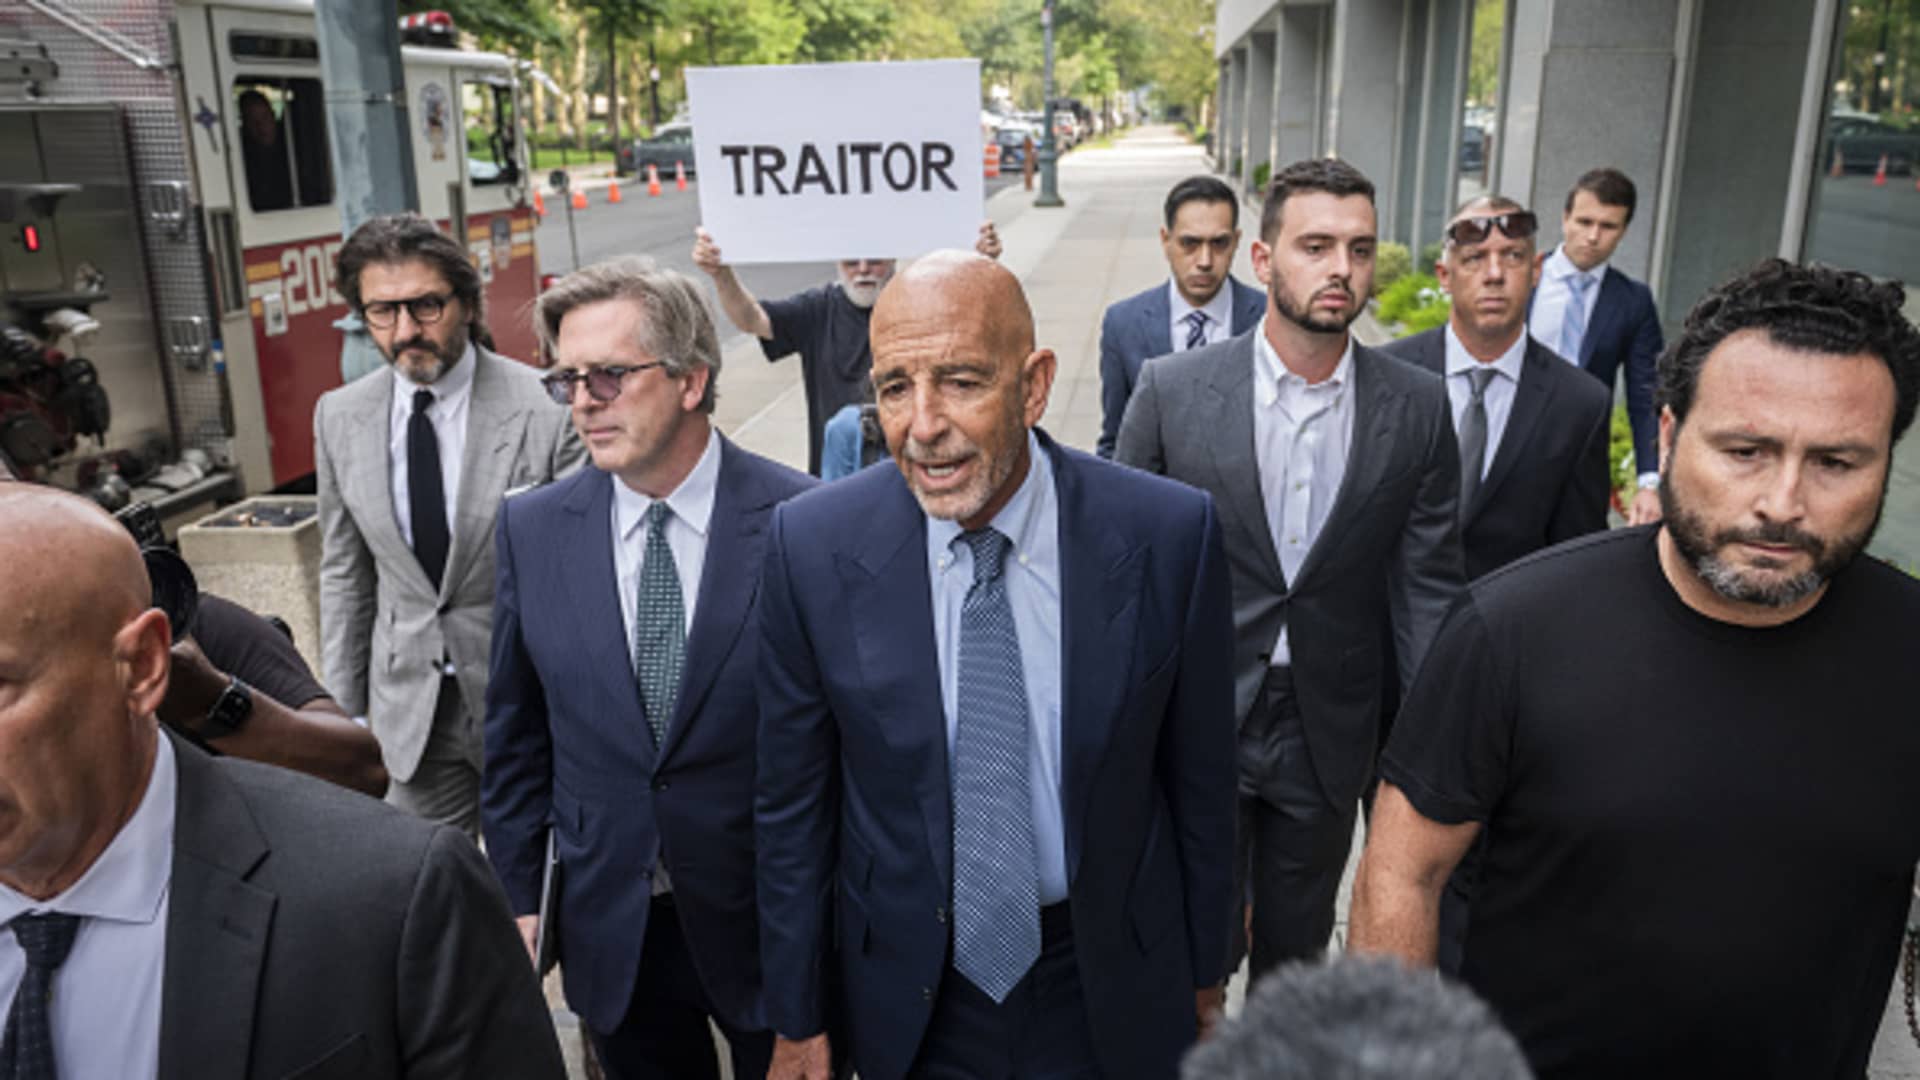 Tom Barrack Jr., founder of Colony Capital Inc., center, arrives at criminal court in New York, U.S., on Monday, July 26, 2021.